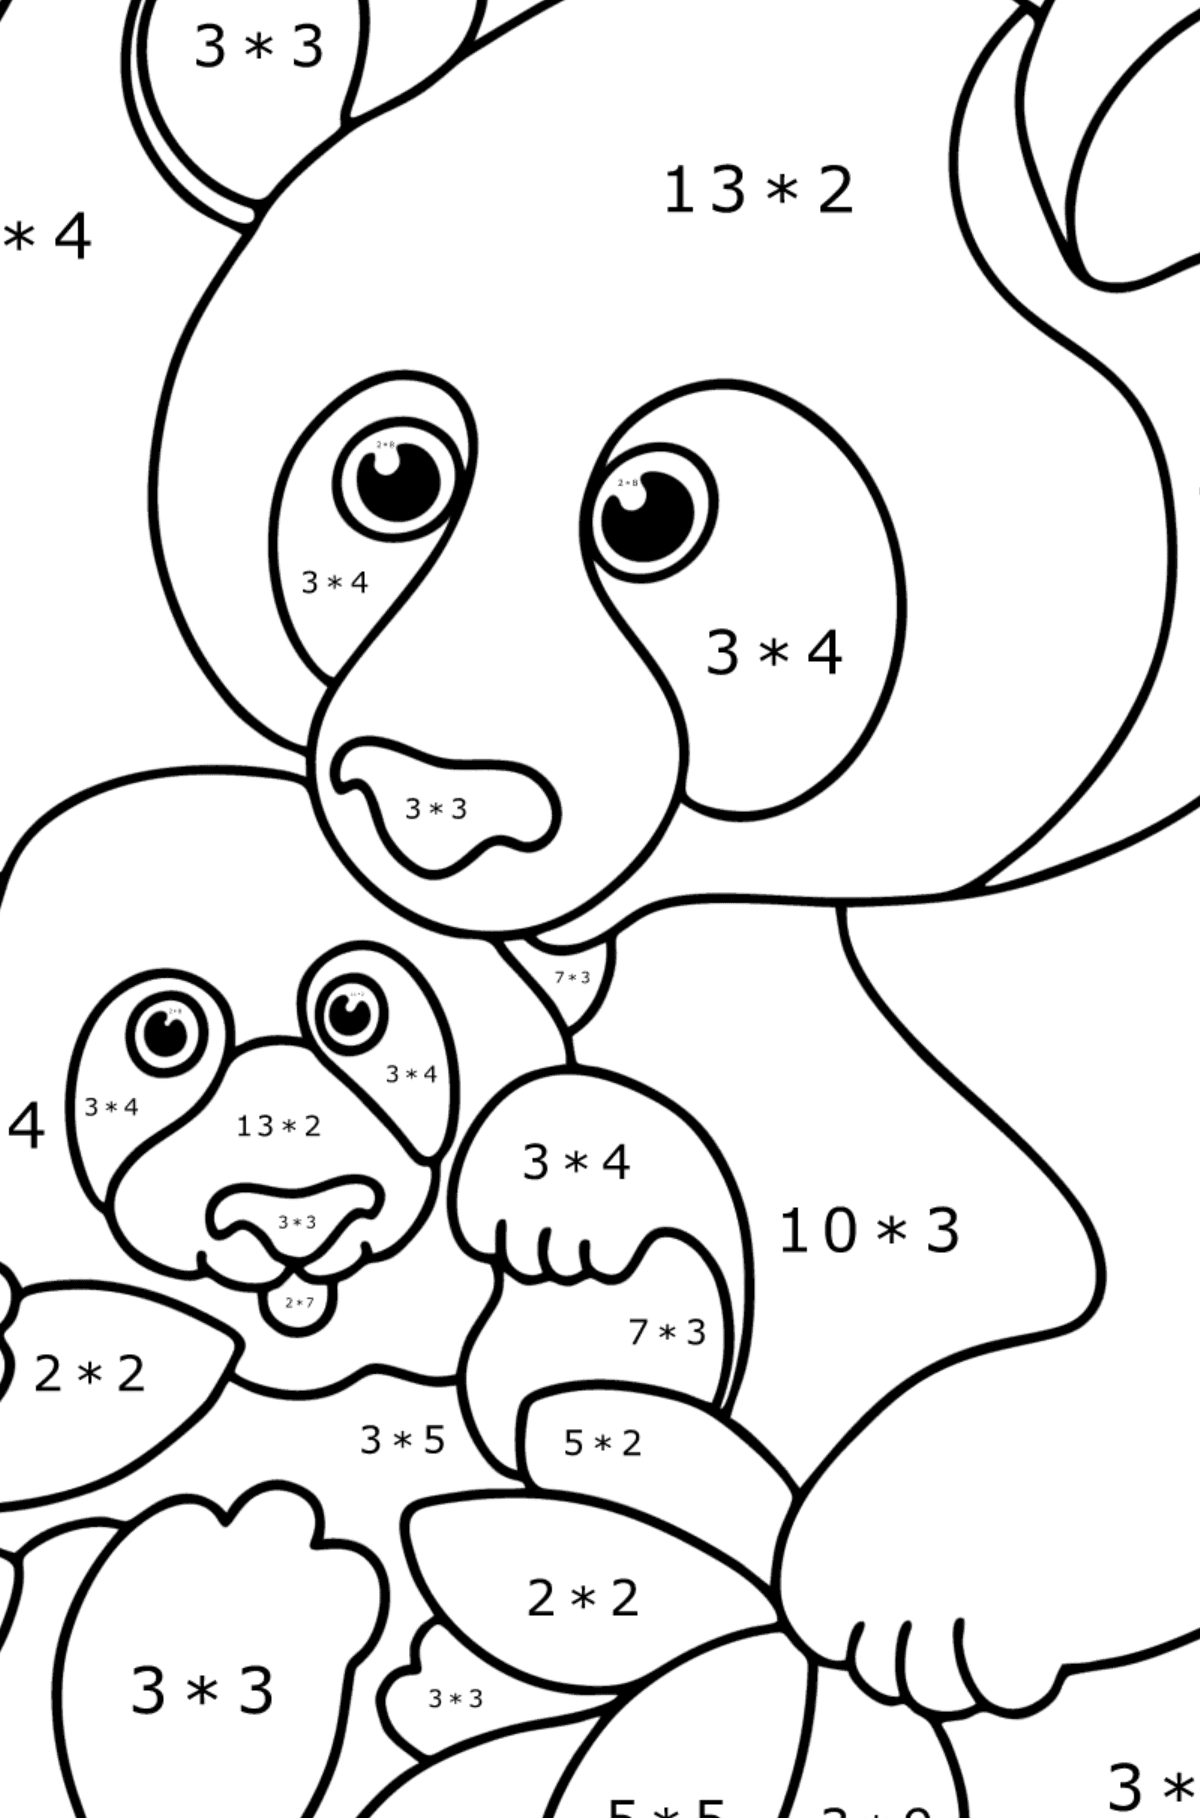 Giant panda with a cub coloring page - Math Coloring - Multiplication for Kids